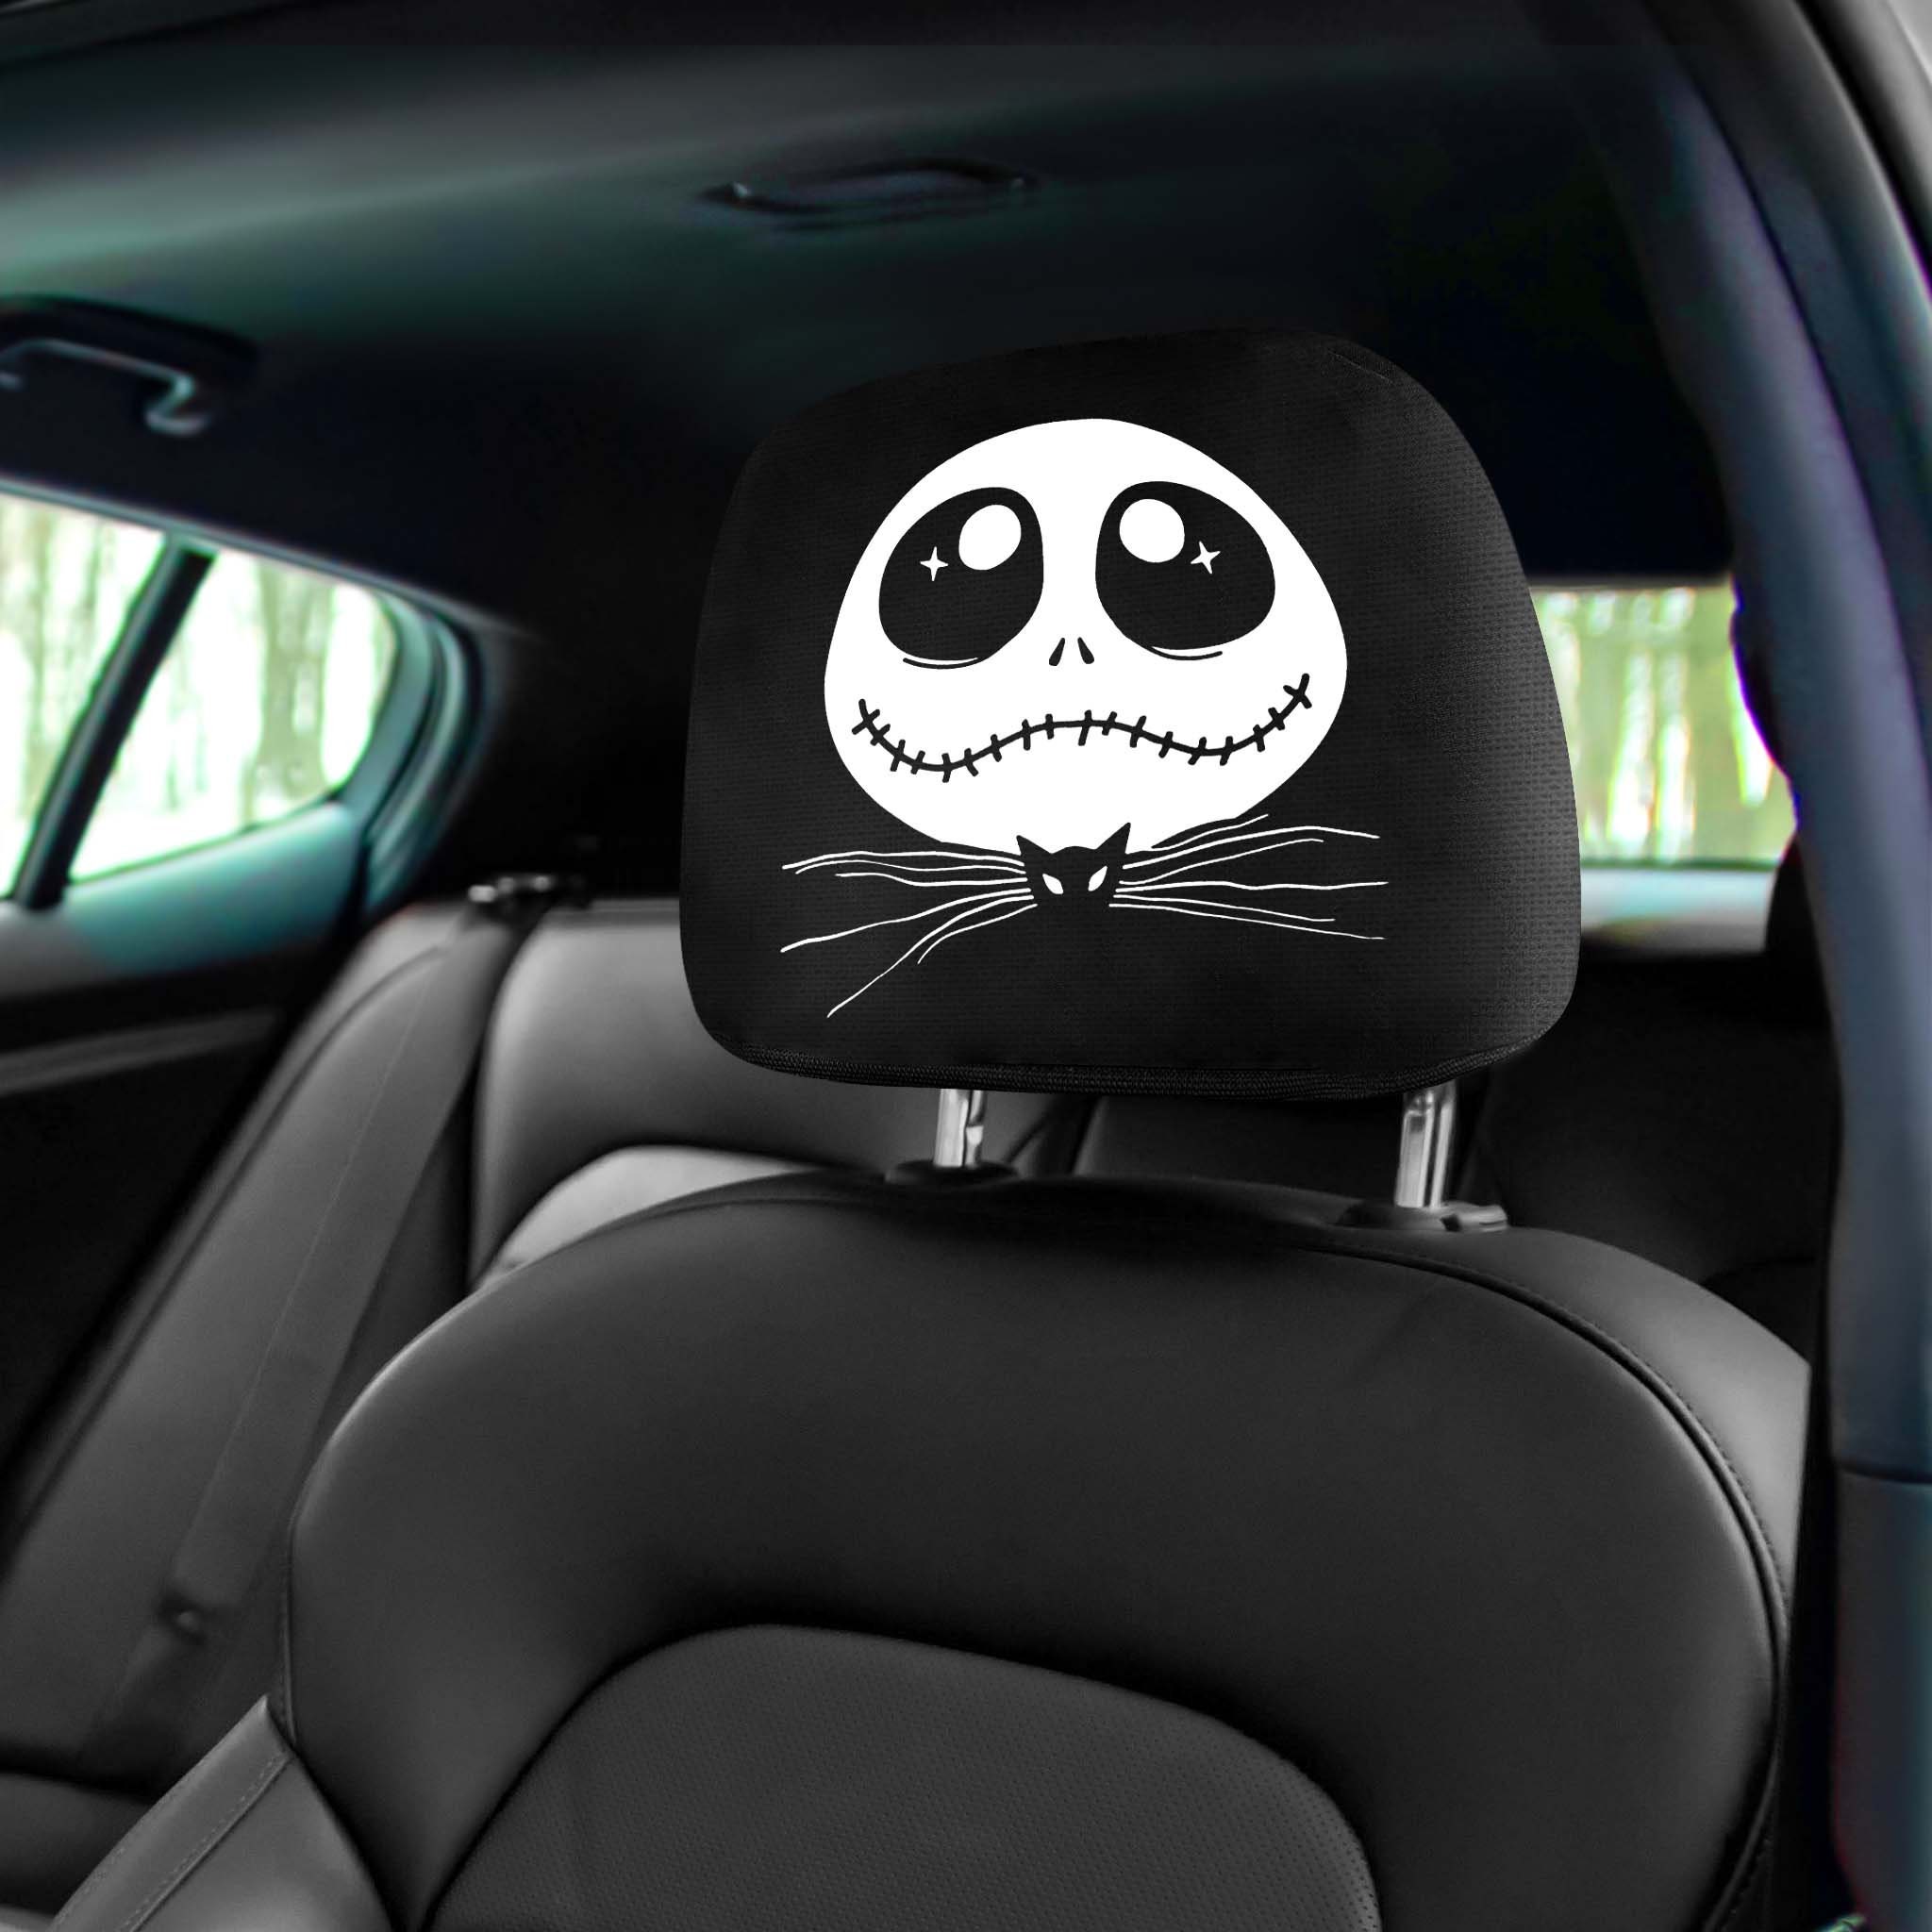 Father's Day Gift, Car Decor Headrest Covers, Cute Jack Skellington Face - Halloween Gift Set 2 Headrest Cover, Gift For Mom Car Accessories